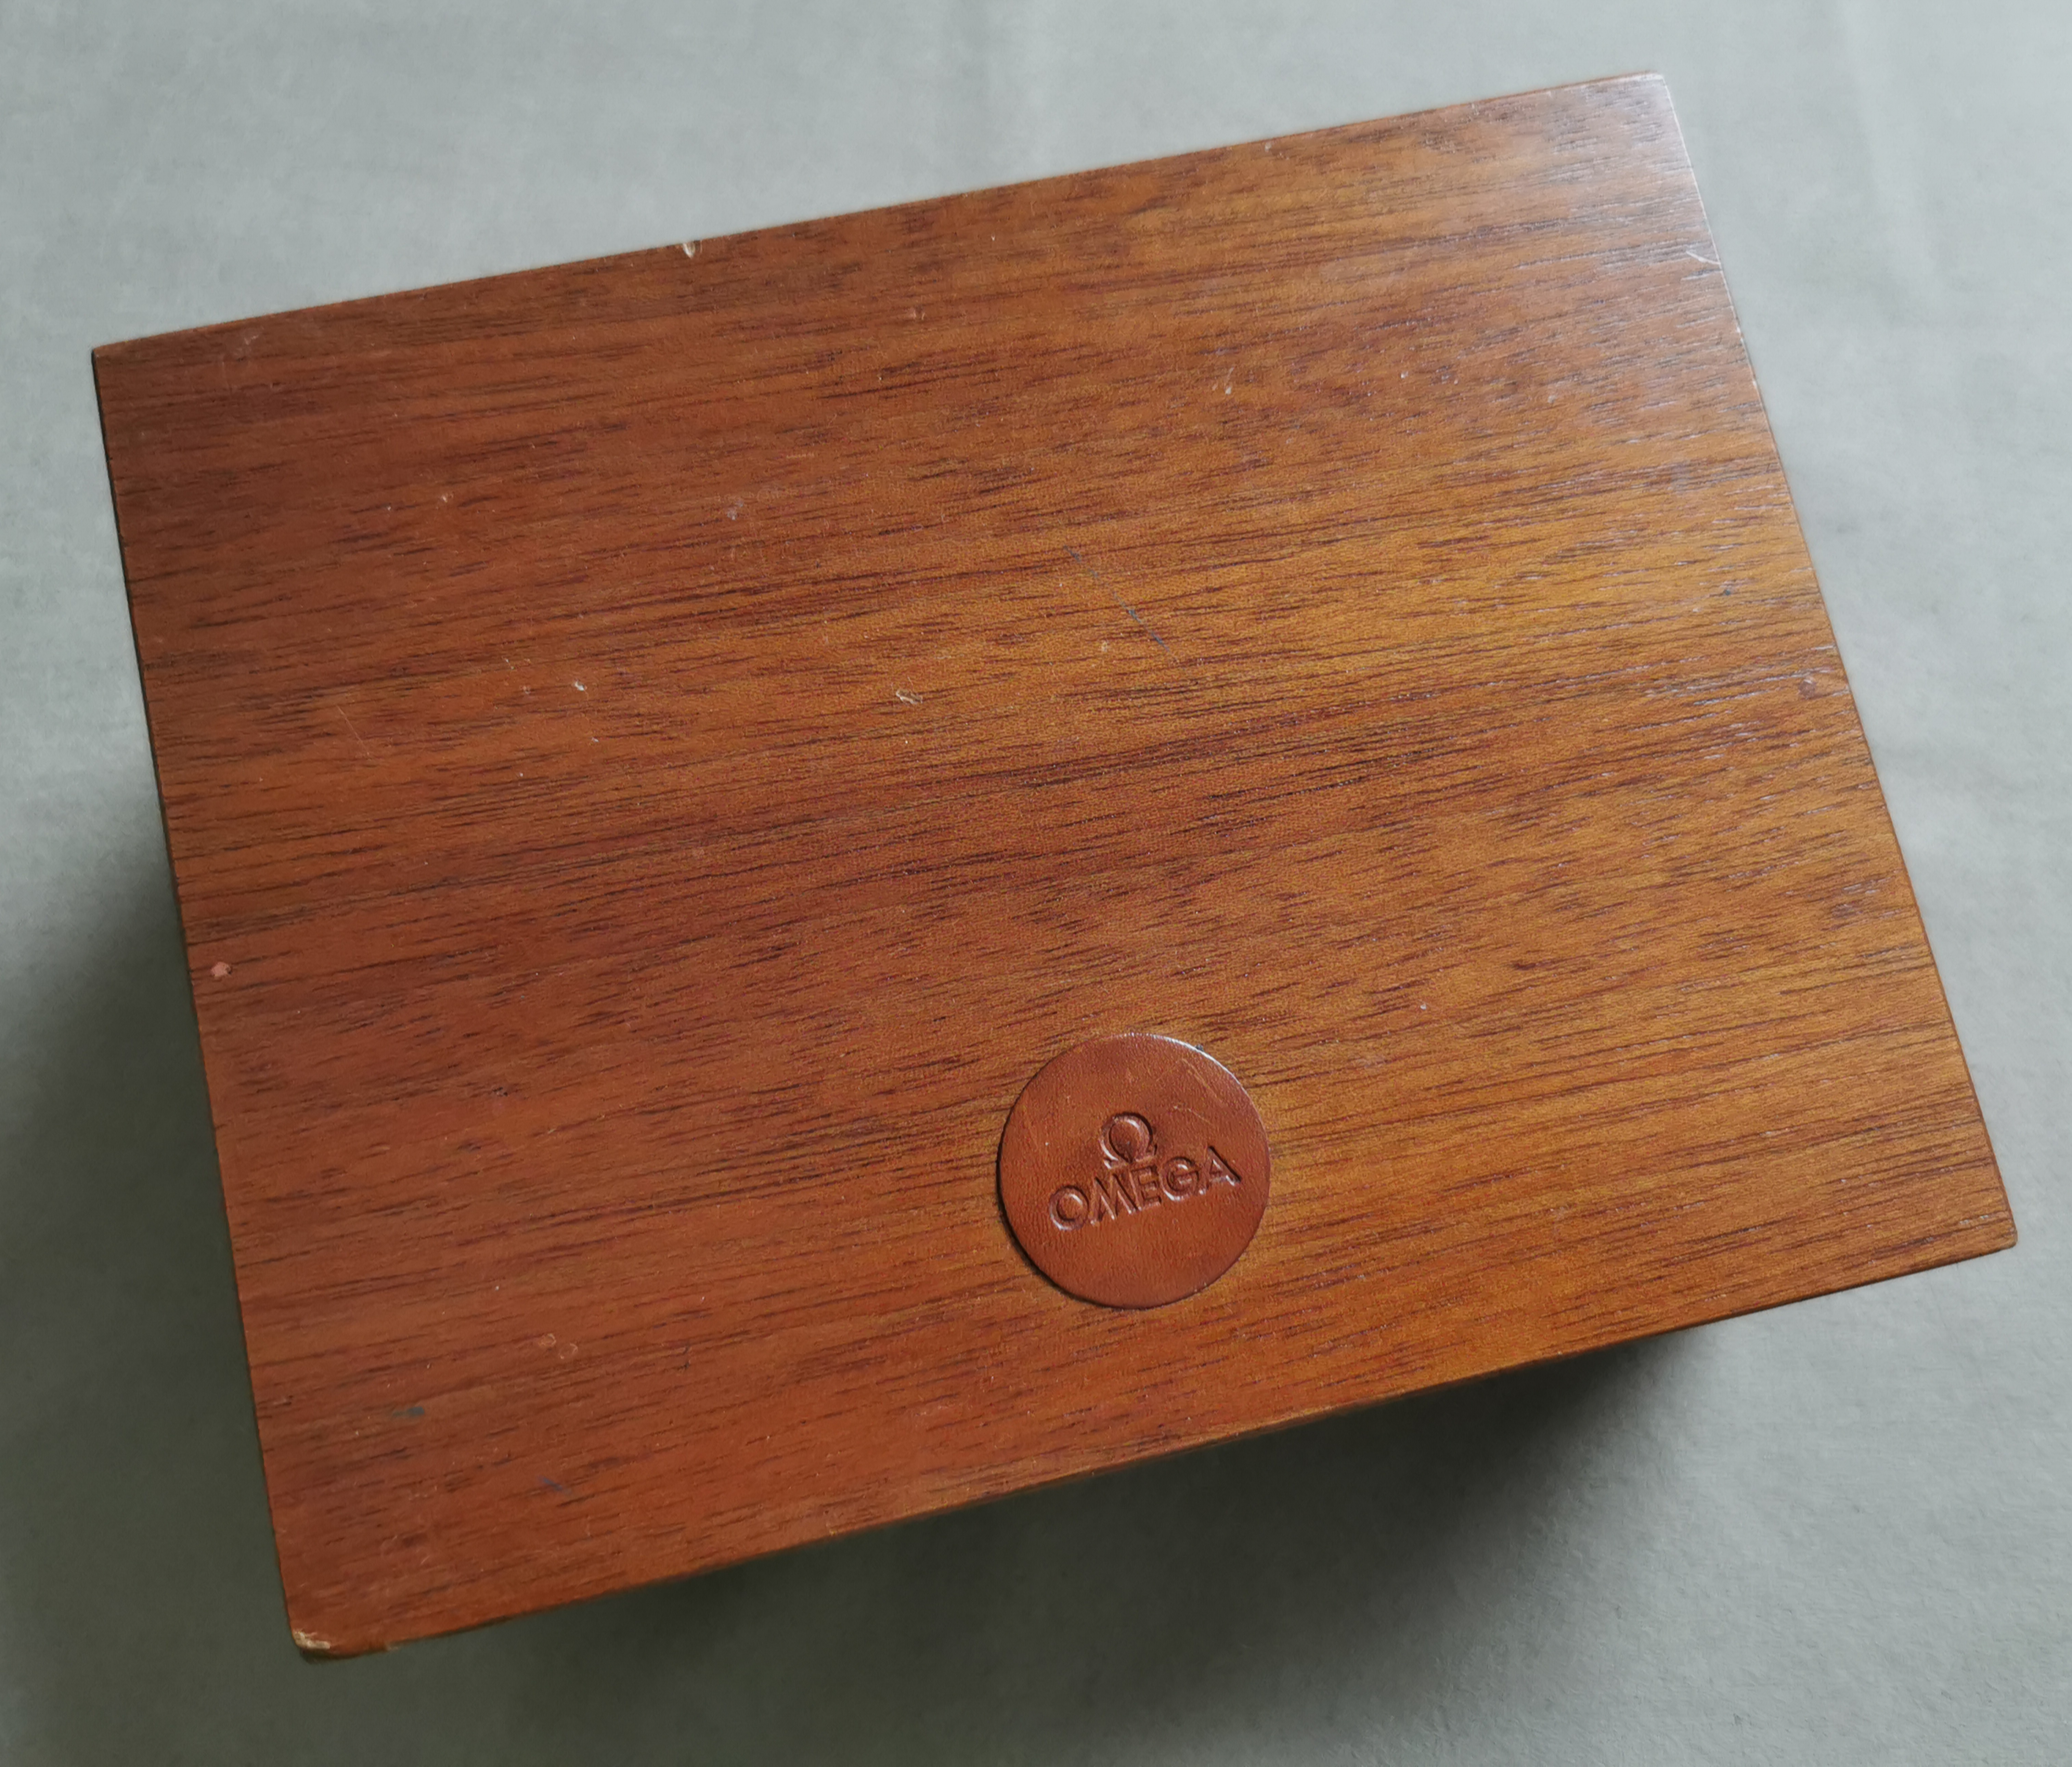 Omega Vintage maxi wooden watch box " Schedoni " leather inserts for any models good condition | San Giorgio a Cremano